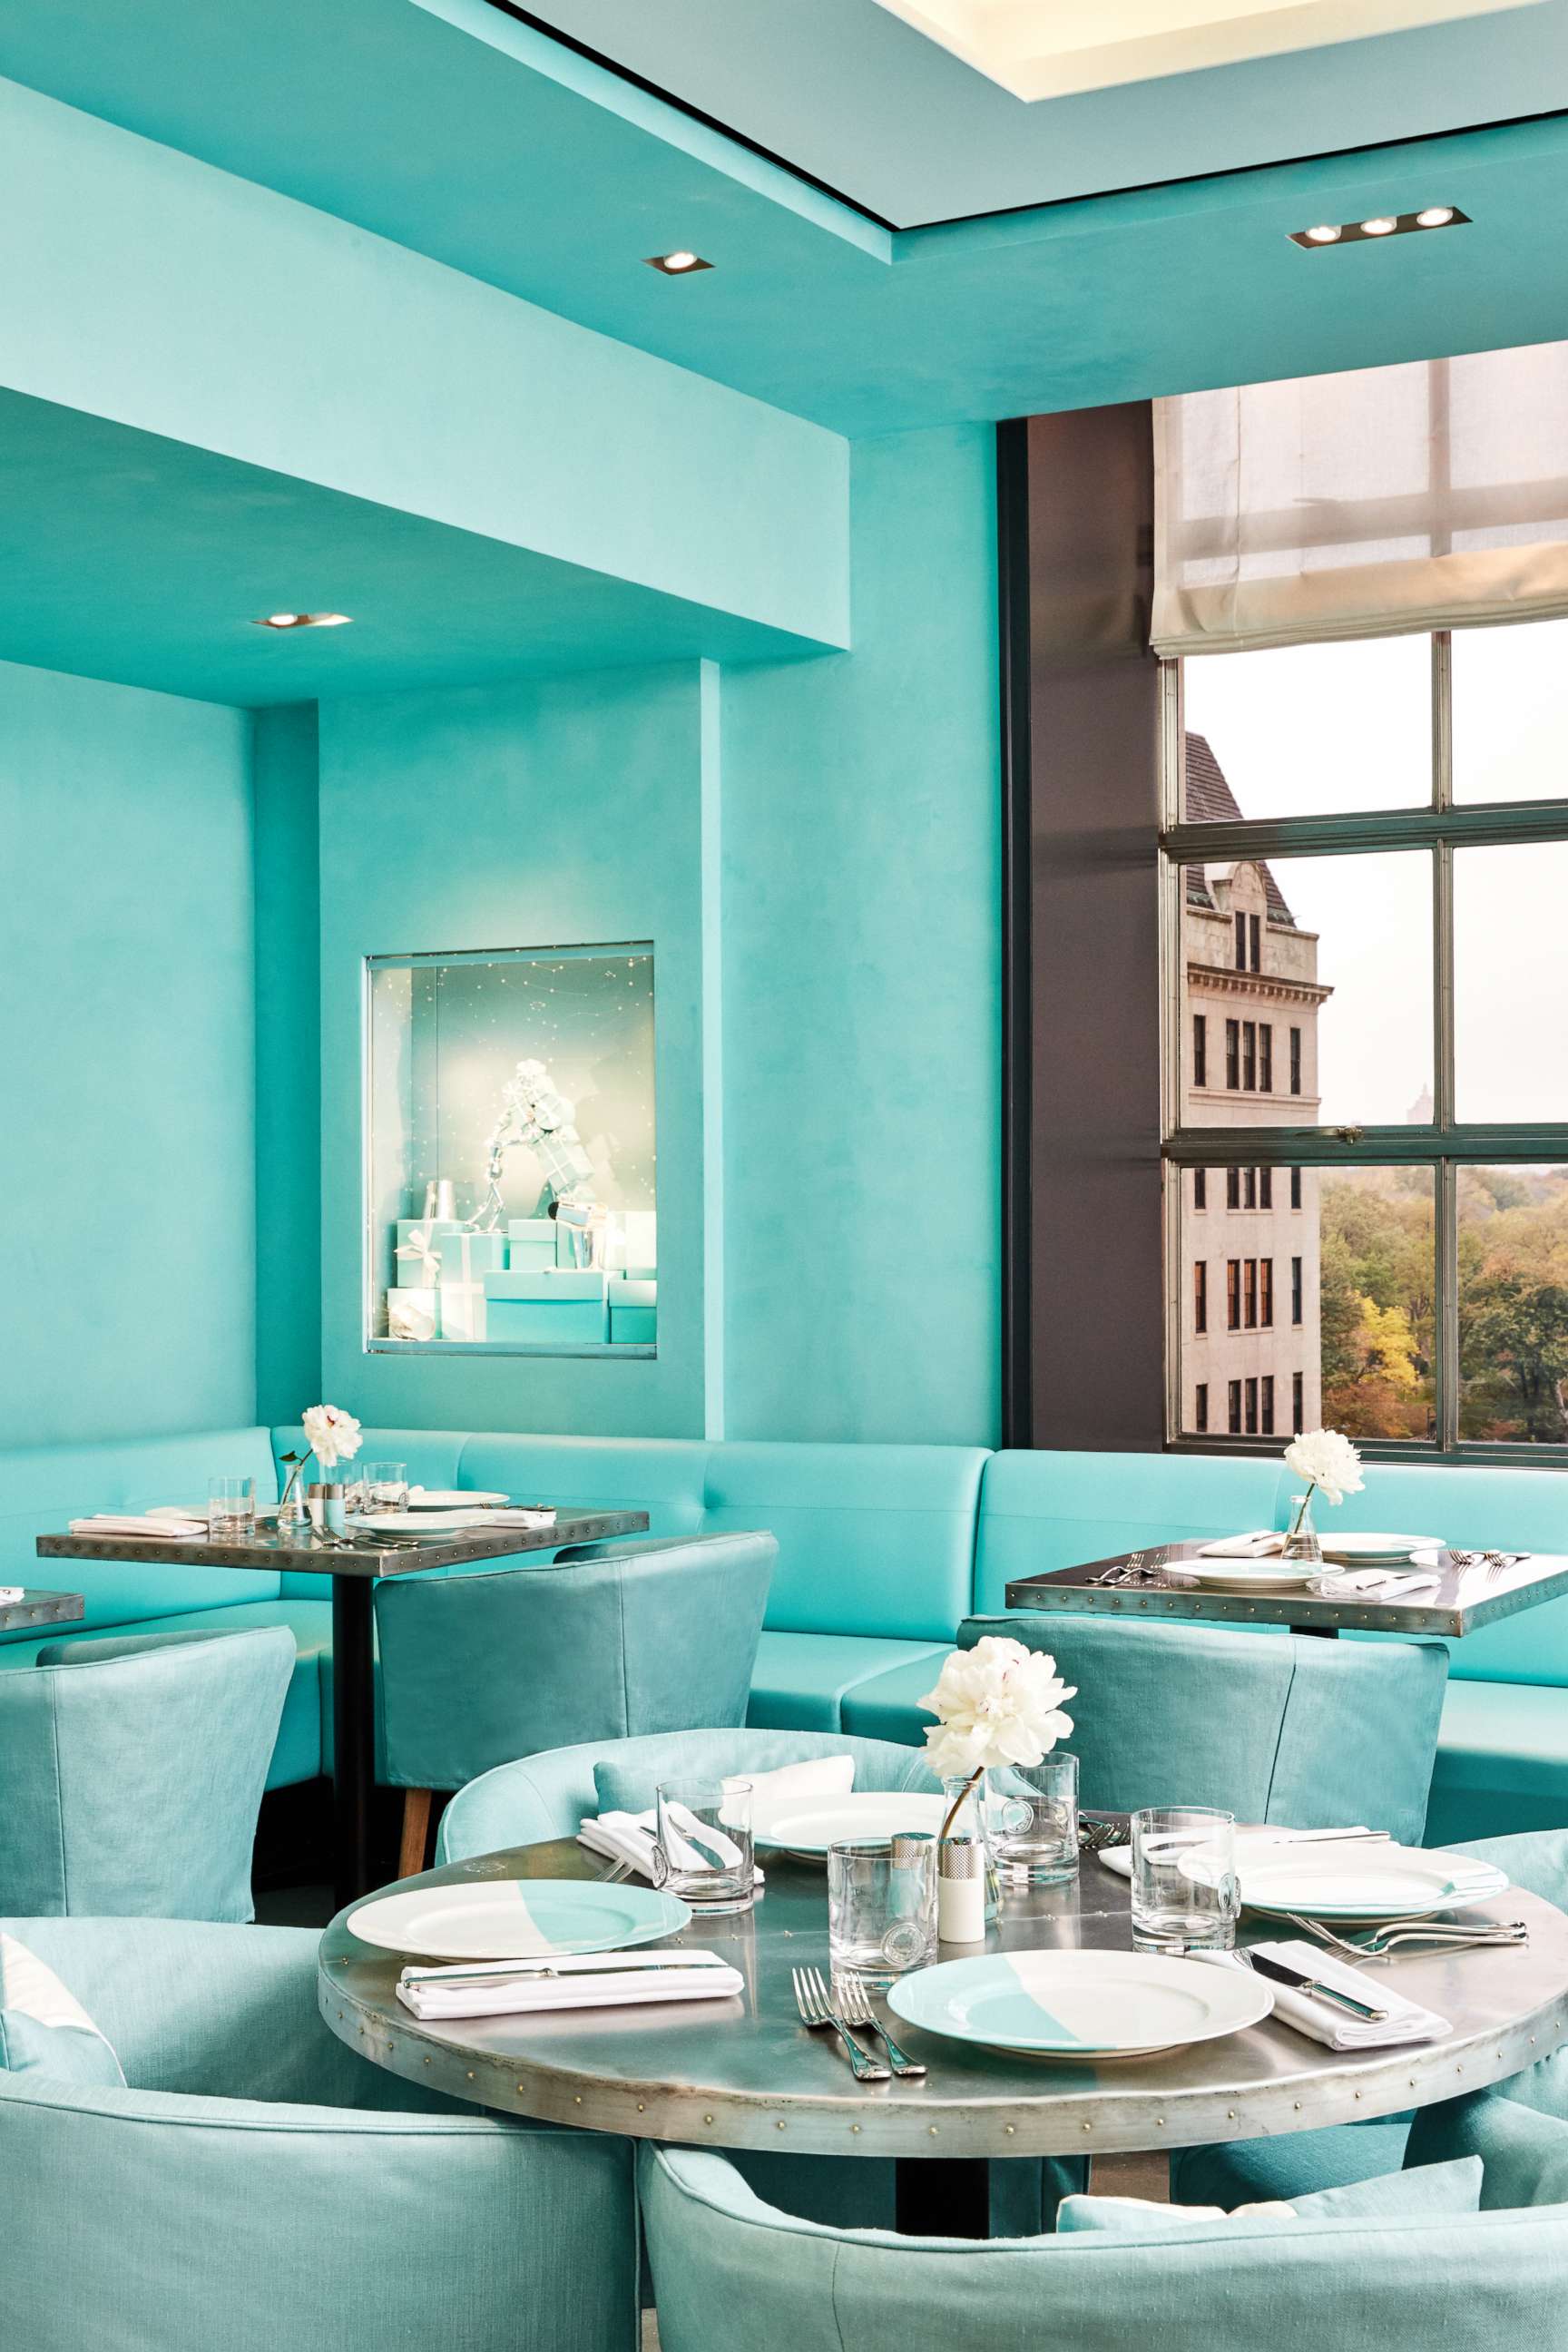 PHOTO: The iconic Tiffany Blue color is seen throughout the interior floor plan and at the forefront of the cafe's design.